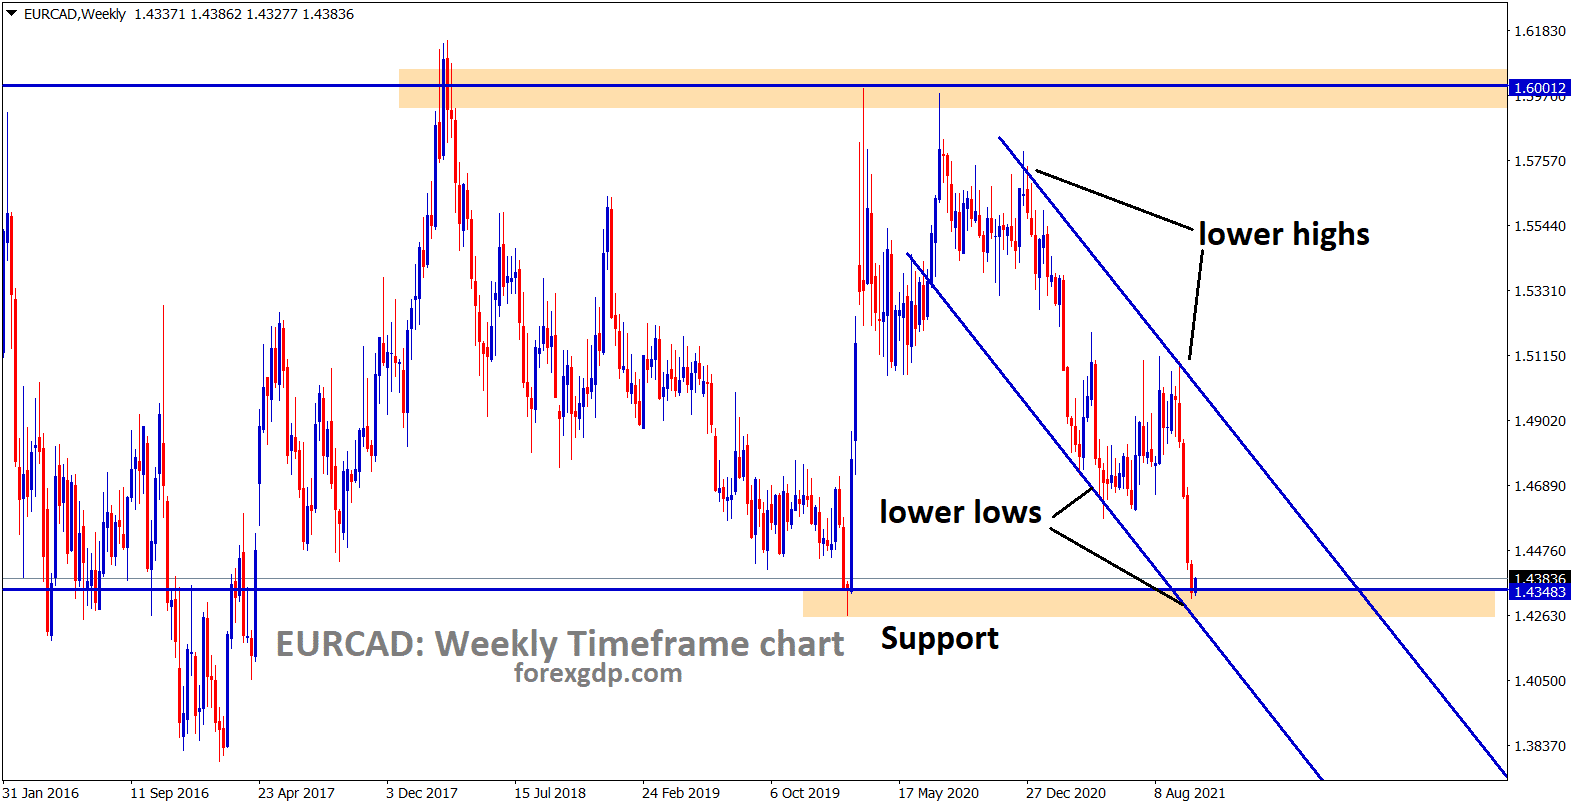 EURCAD is rebounding from the support and the lower low level of the descending channel